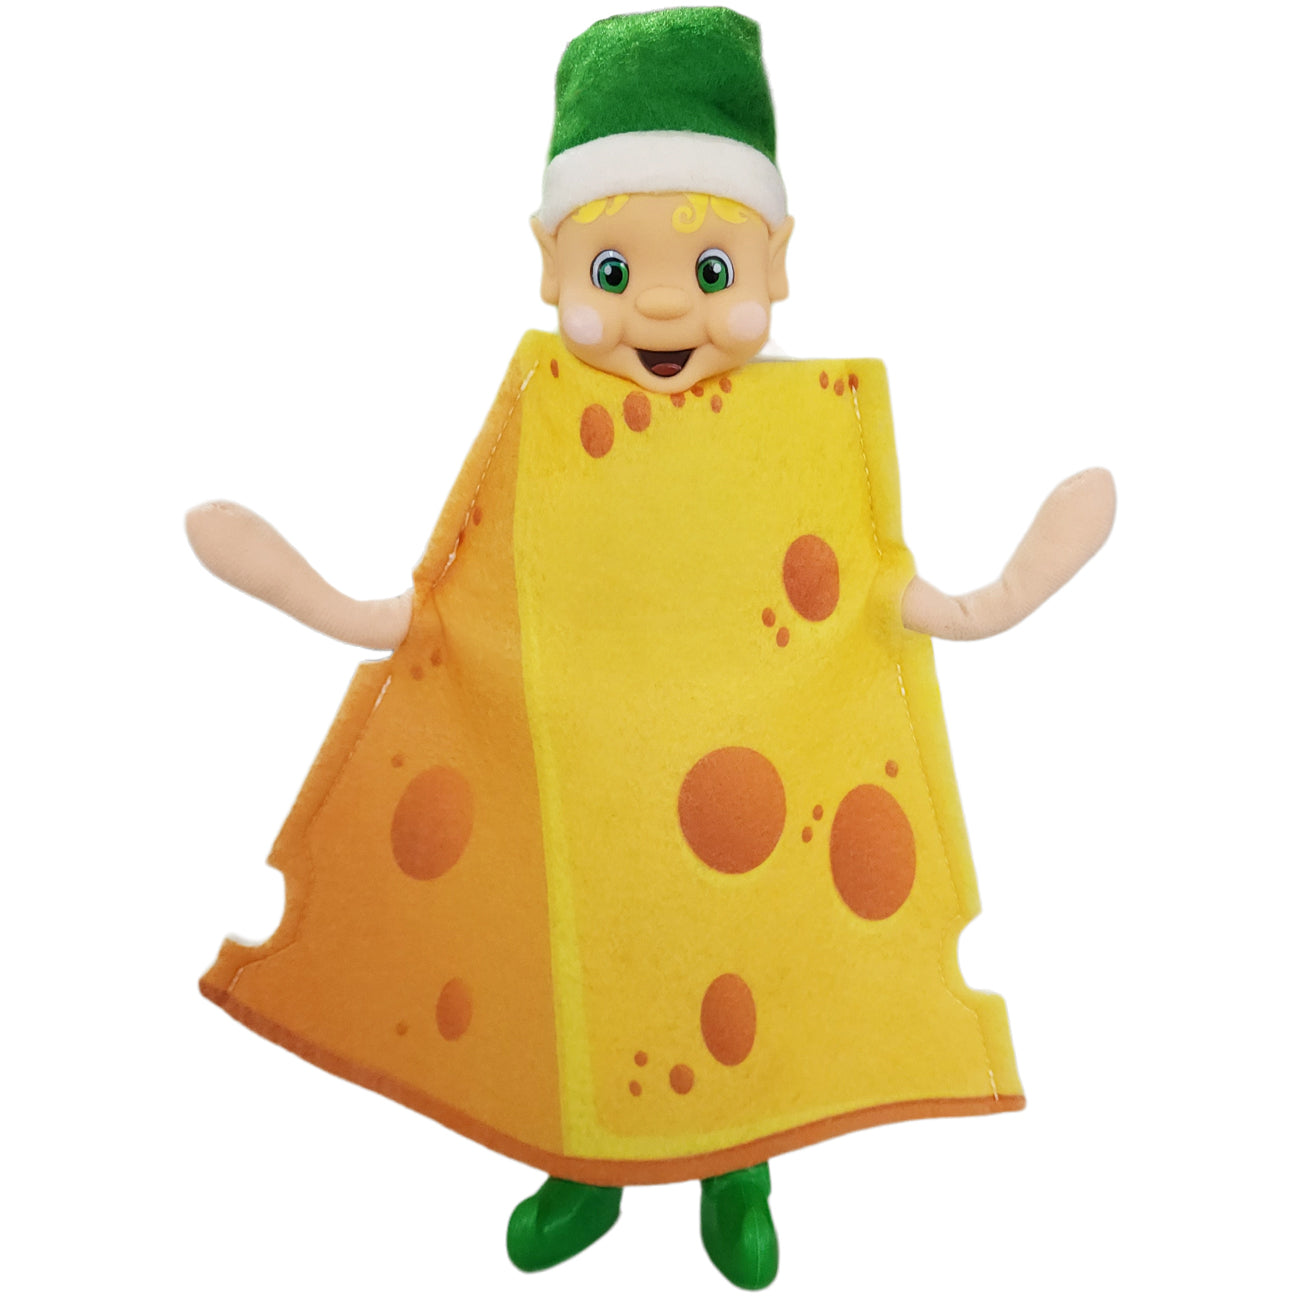 Cheese Elf Costume Worn by My Magical Elf Friends